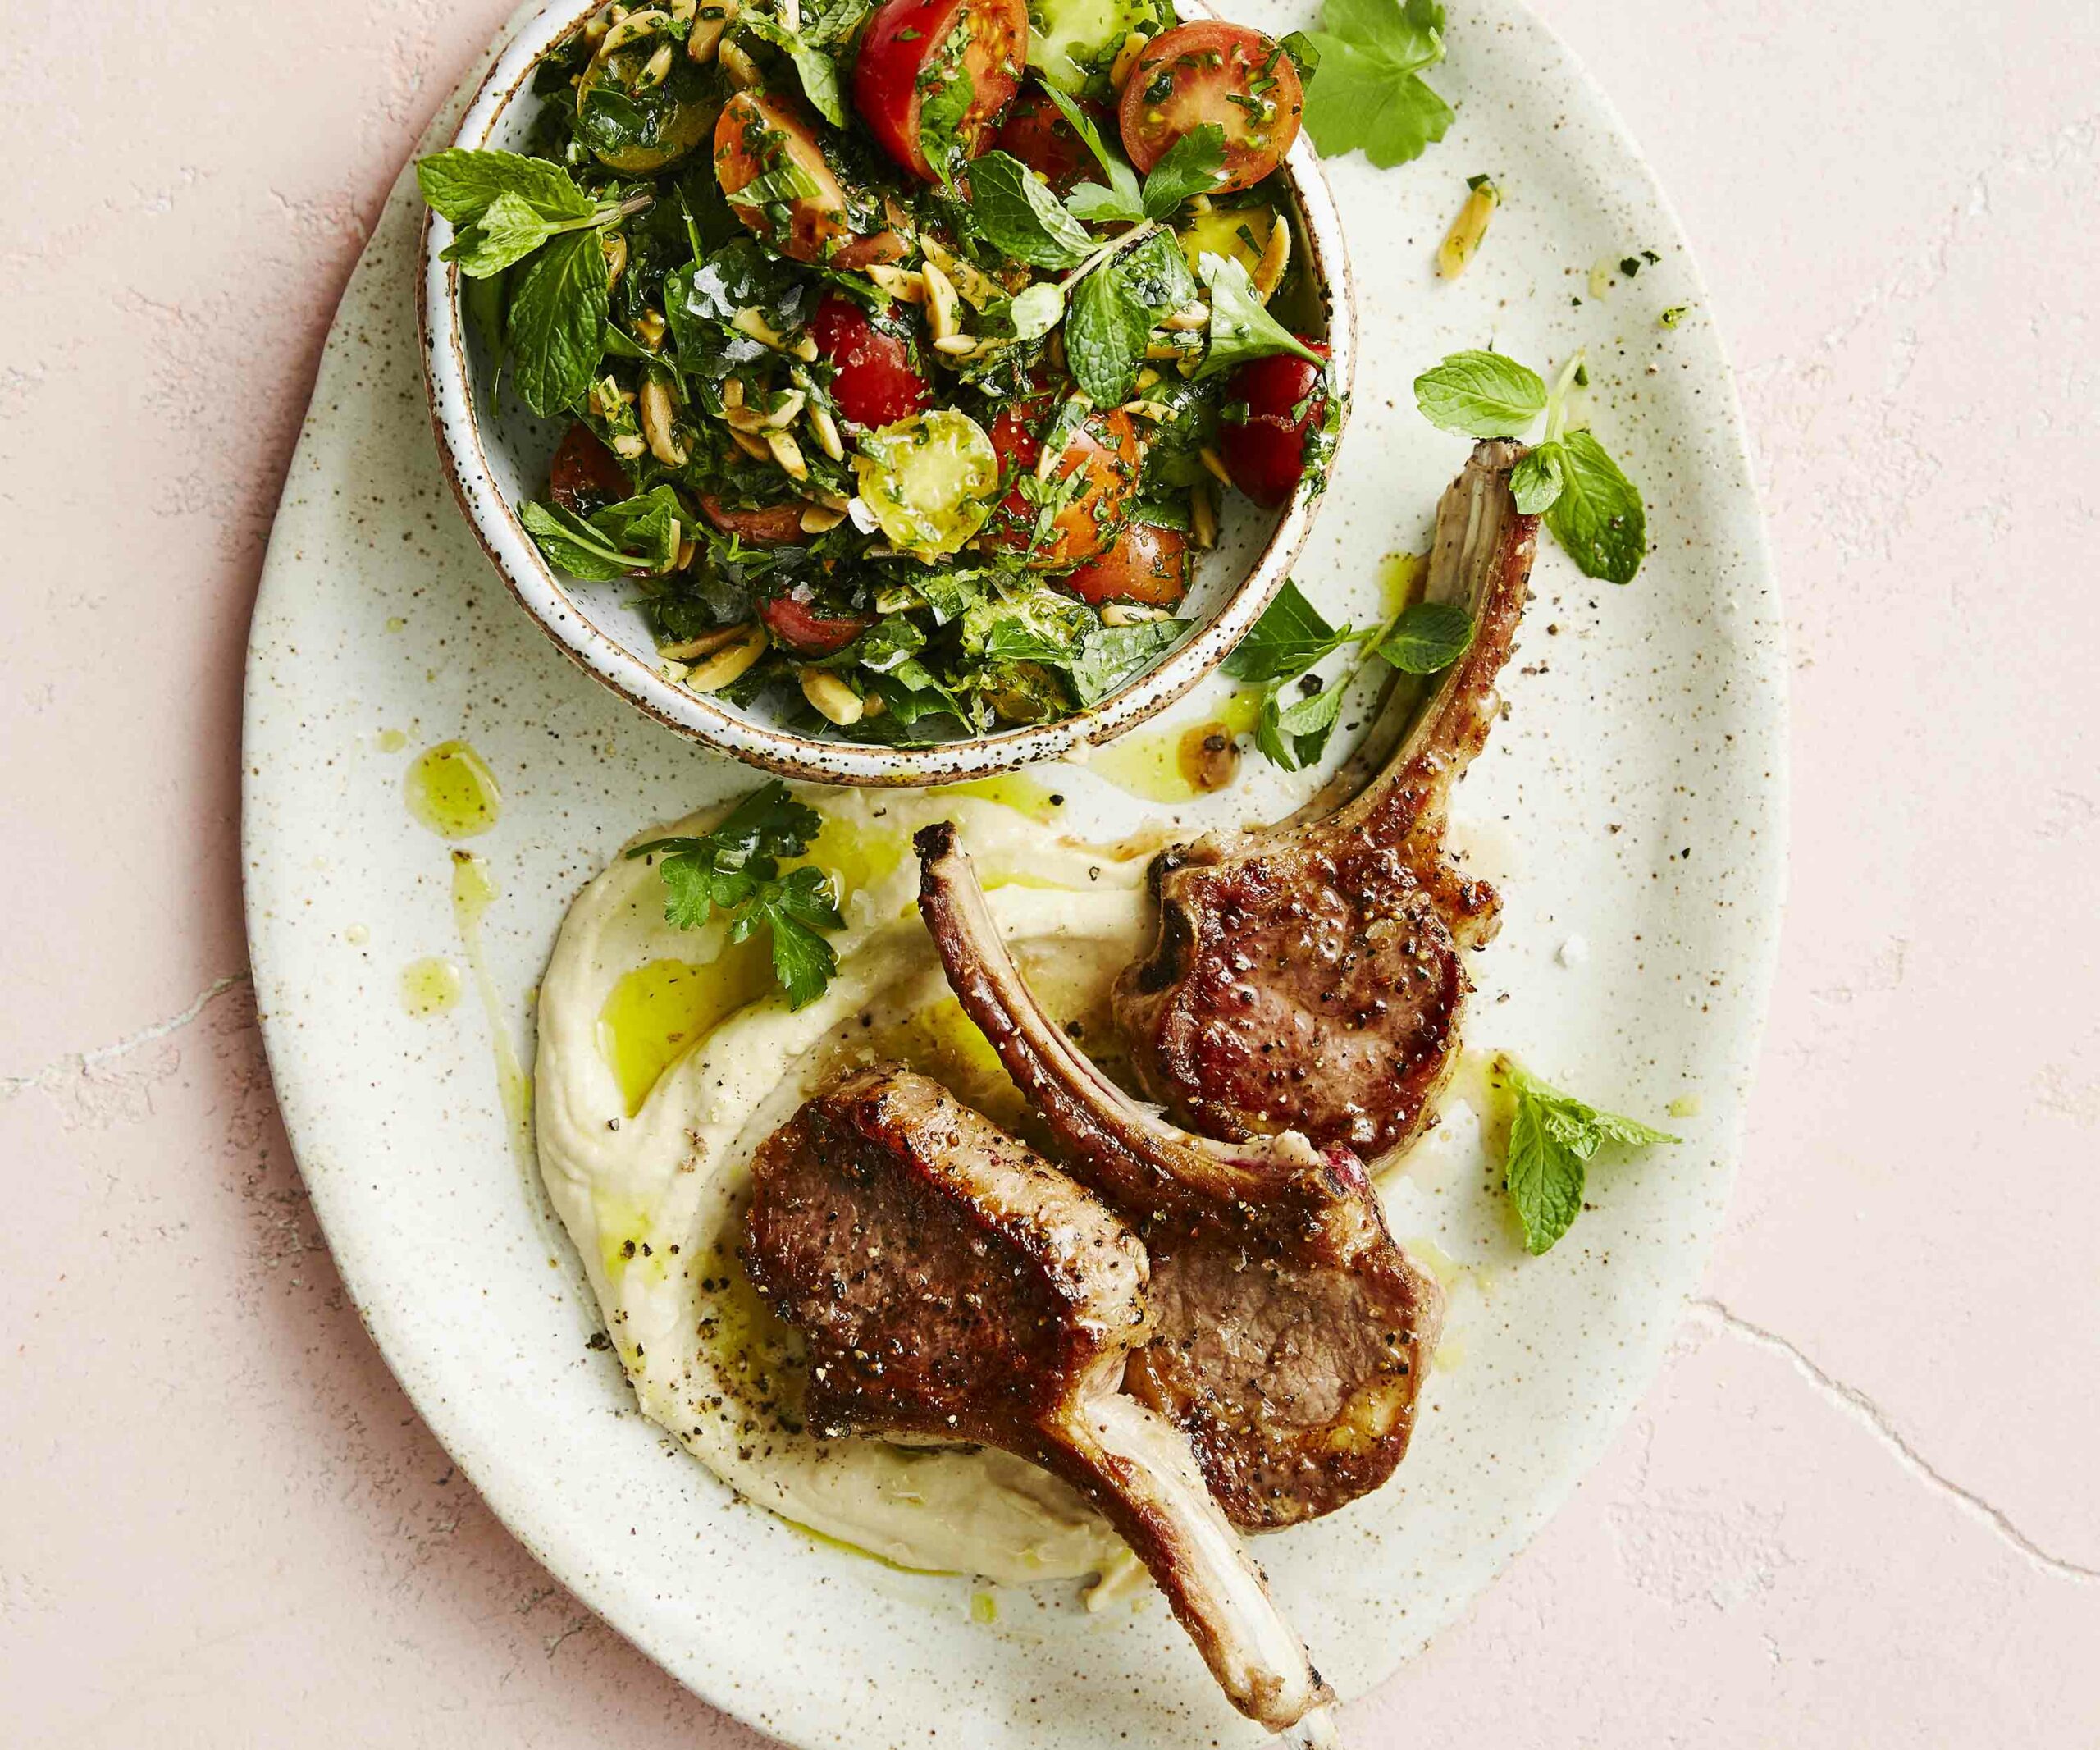 Three lamb cutlets on a plate with hummus and tabbouleh in a bowl